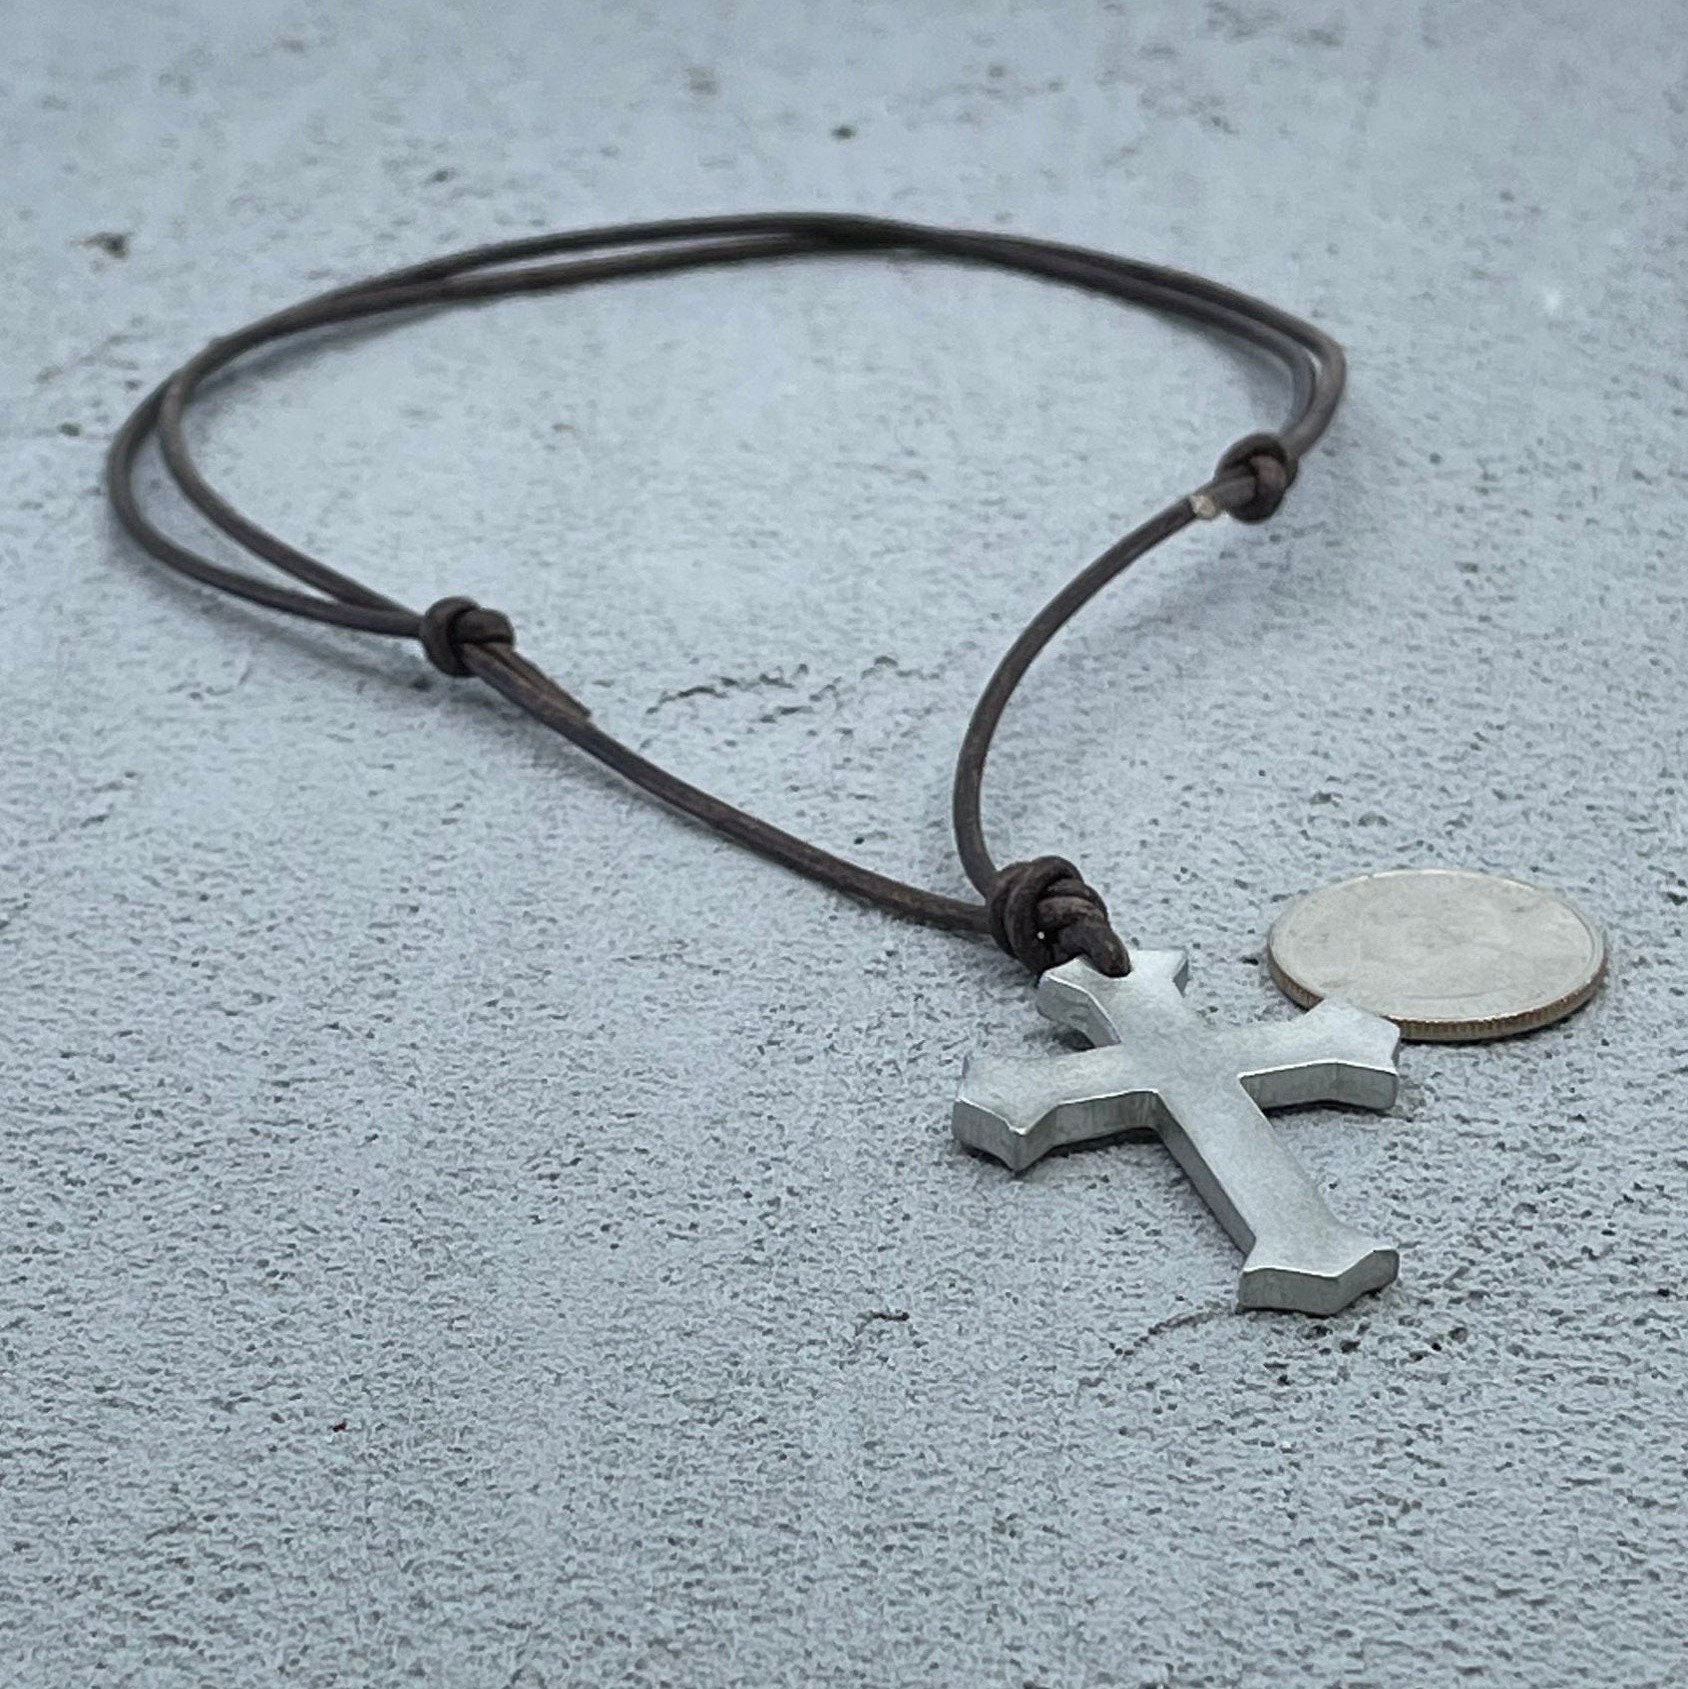 Buy AFH Holy Jesus Christ Crucifix Cross Leather Cord Chain Bronze Pendant  Chain Necklace For Unisex at Amazon.in